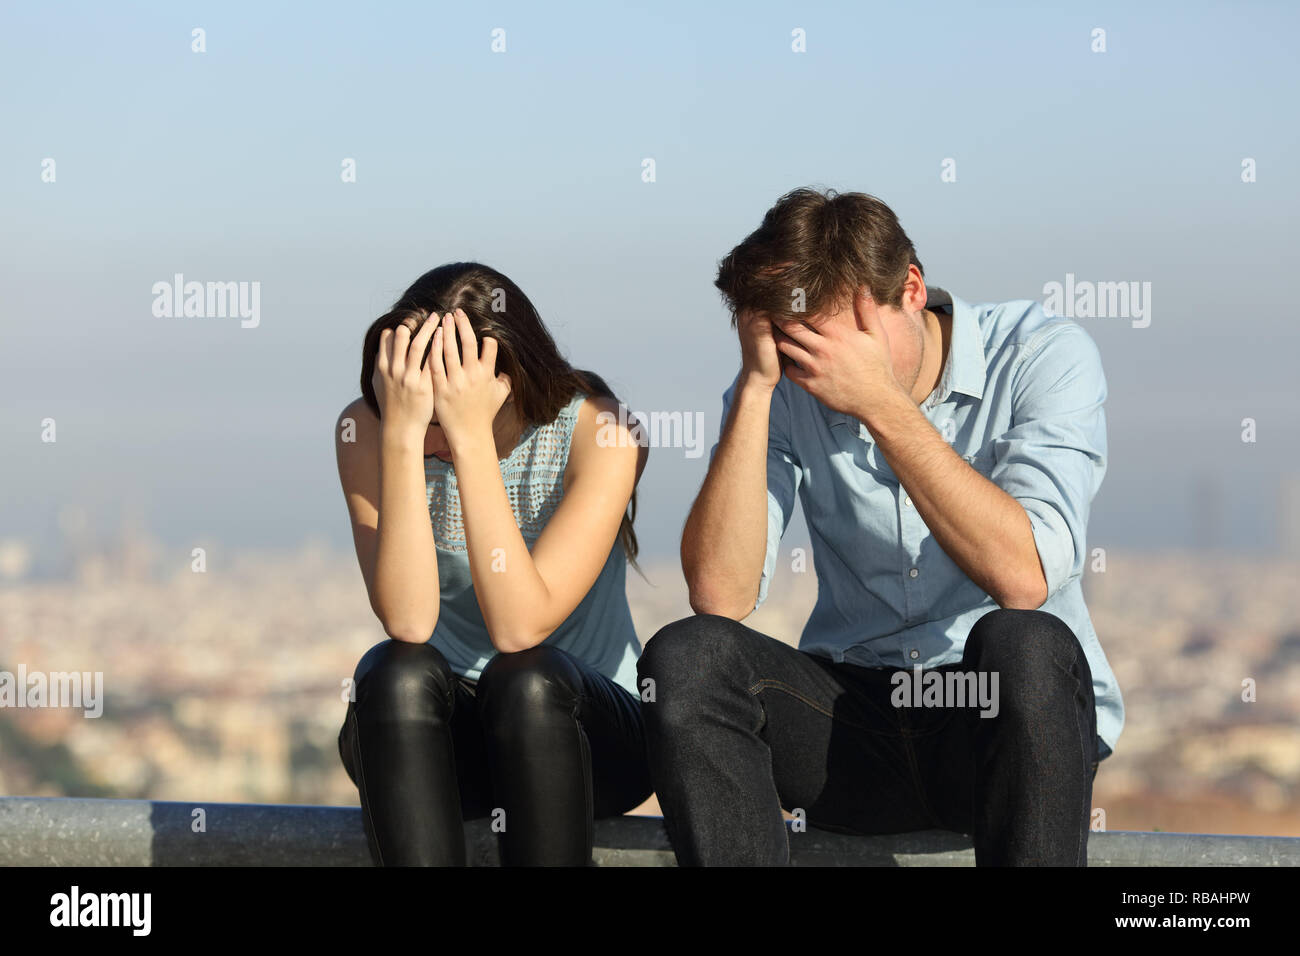 Sad couple complaining after argument sitting outdoors in a city ourskirts Stock Photo